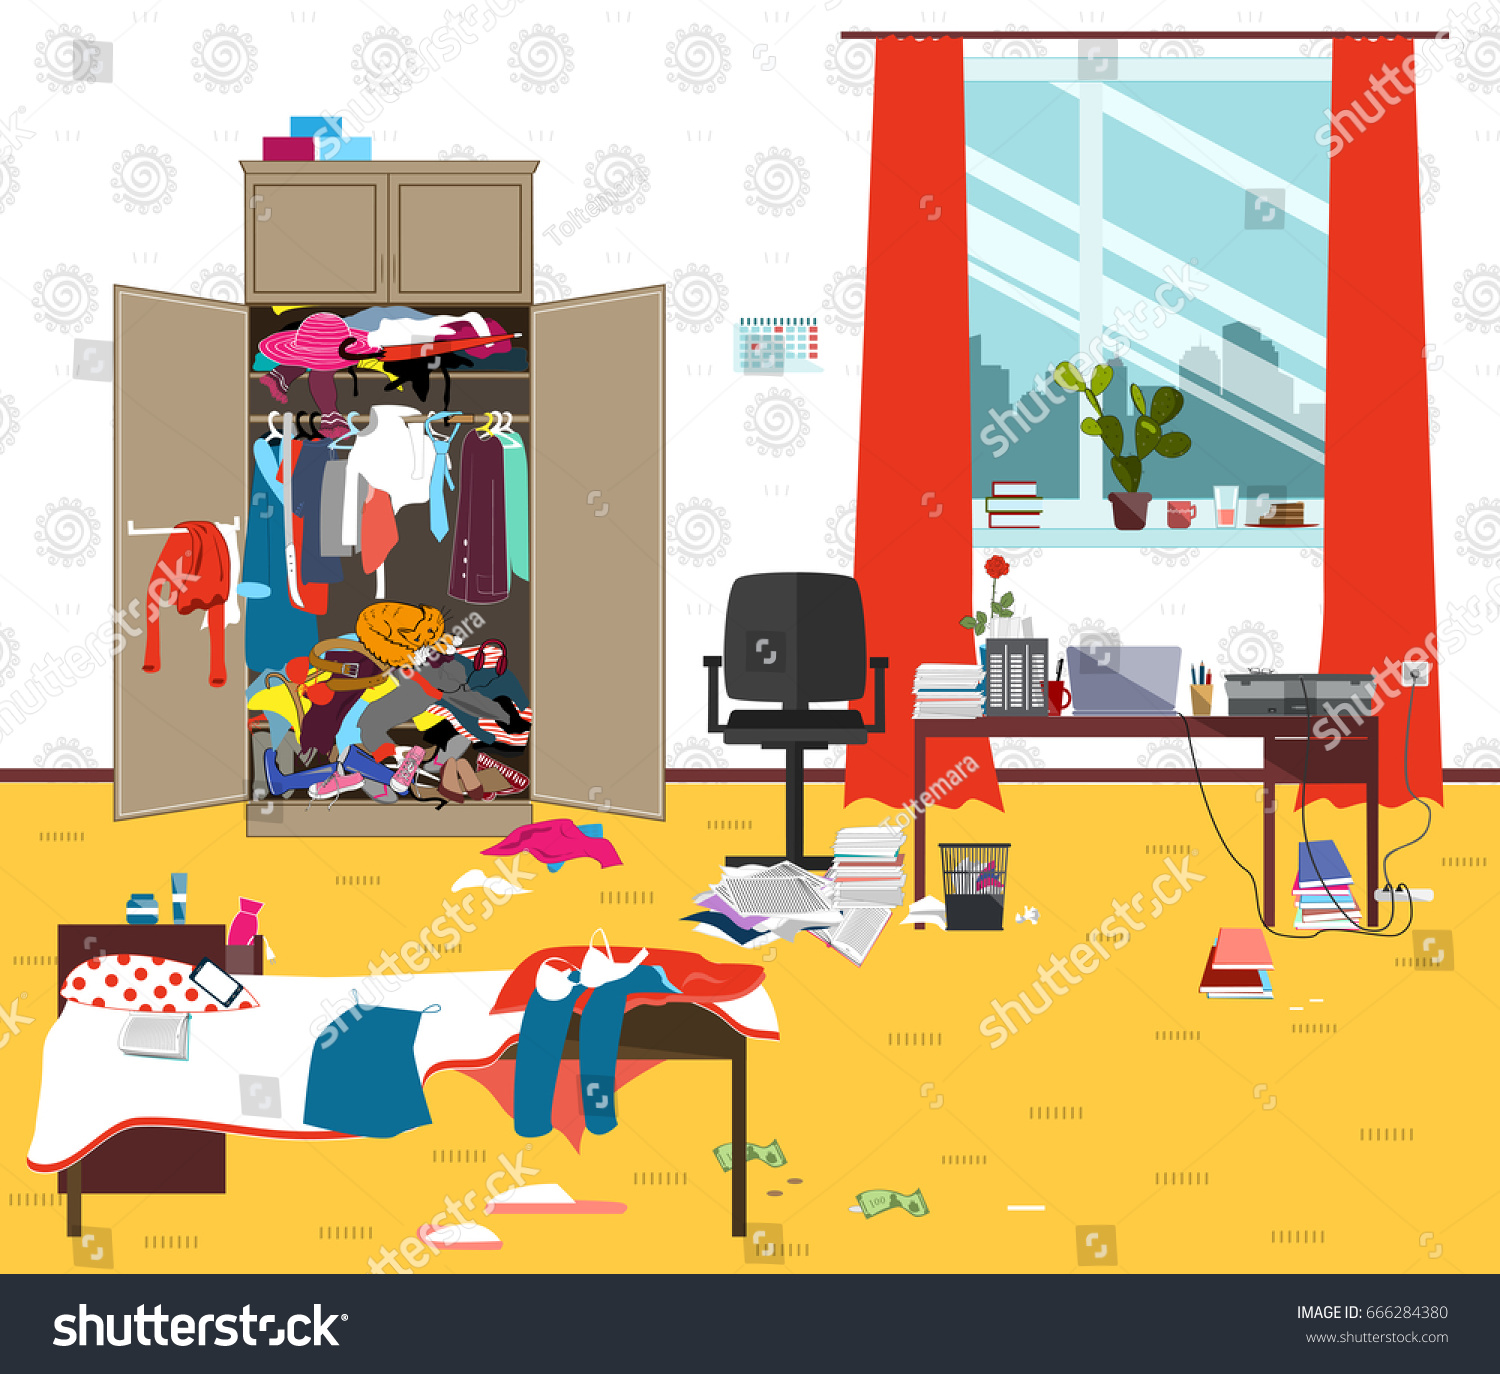 135 Student bed messy Images, Stock Photos & Vectors | Shutterstock